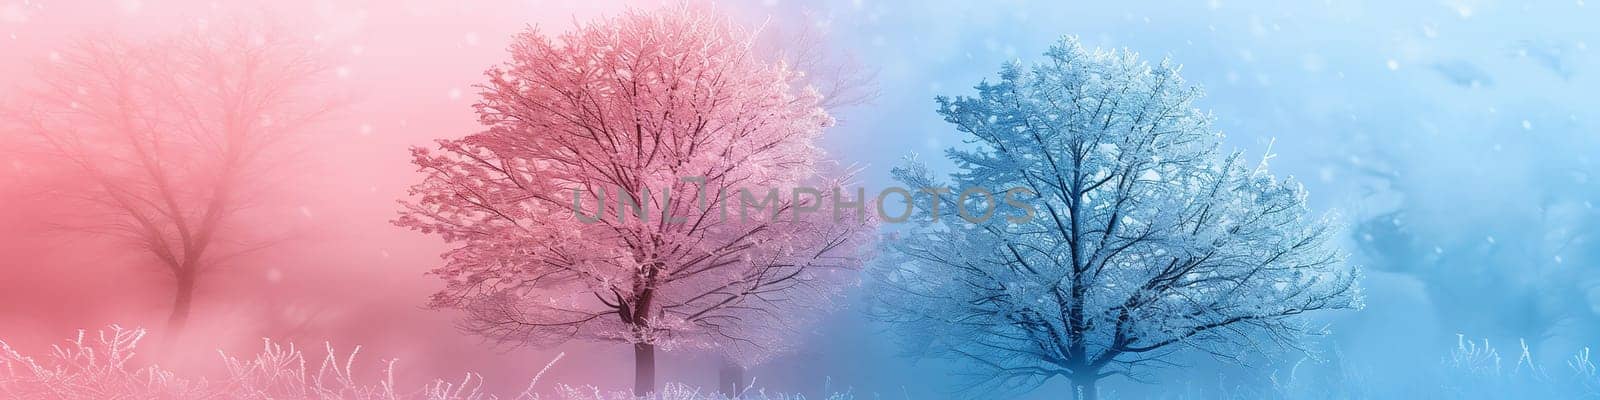 illustration with pink trees blossom on light background by Andelov13